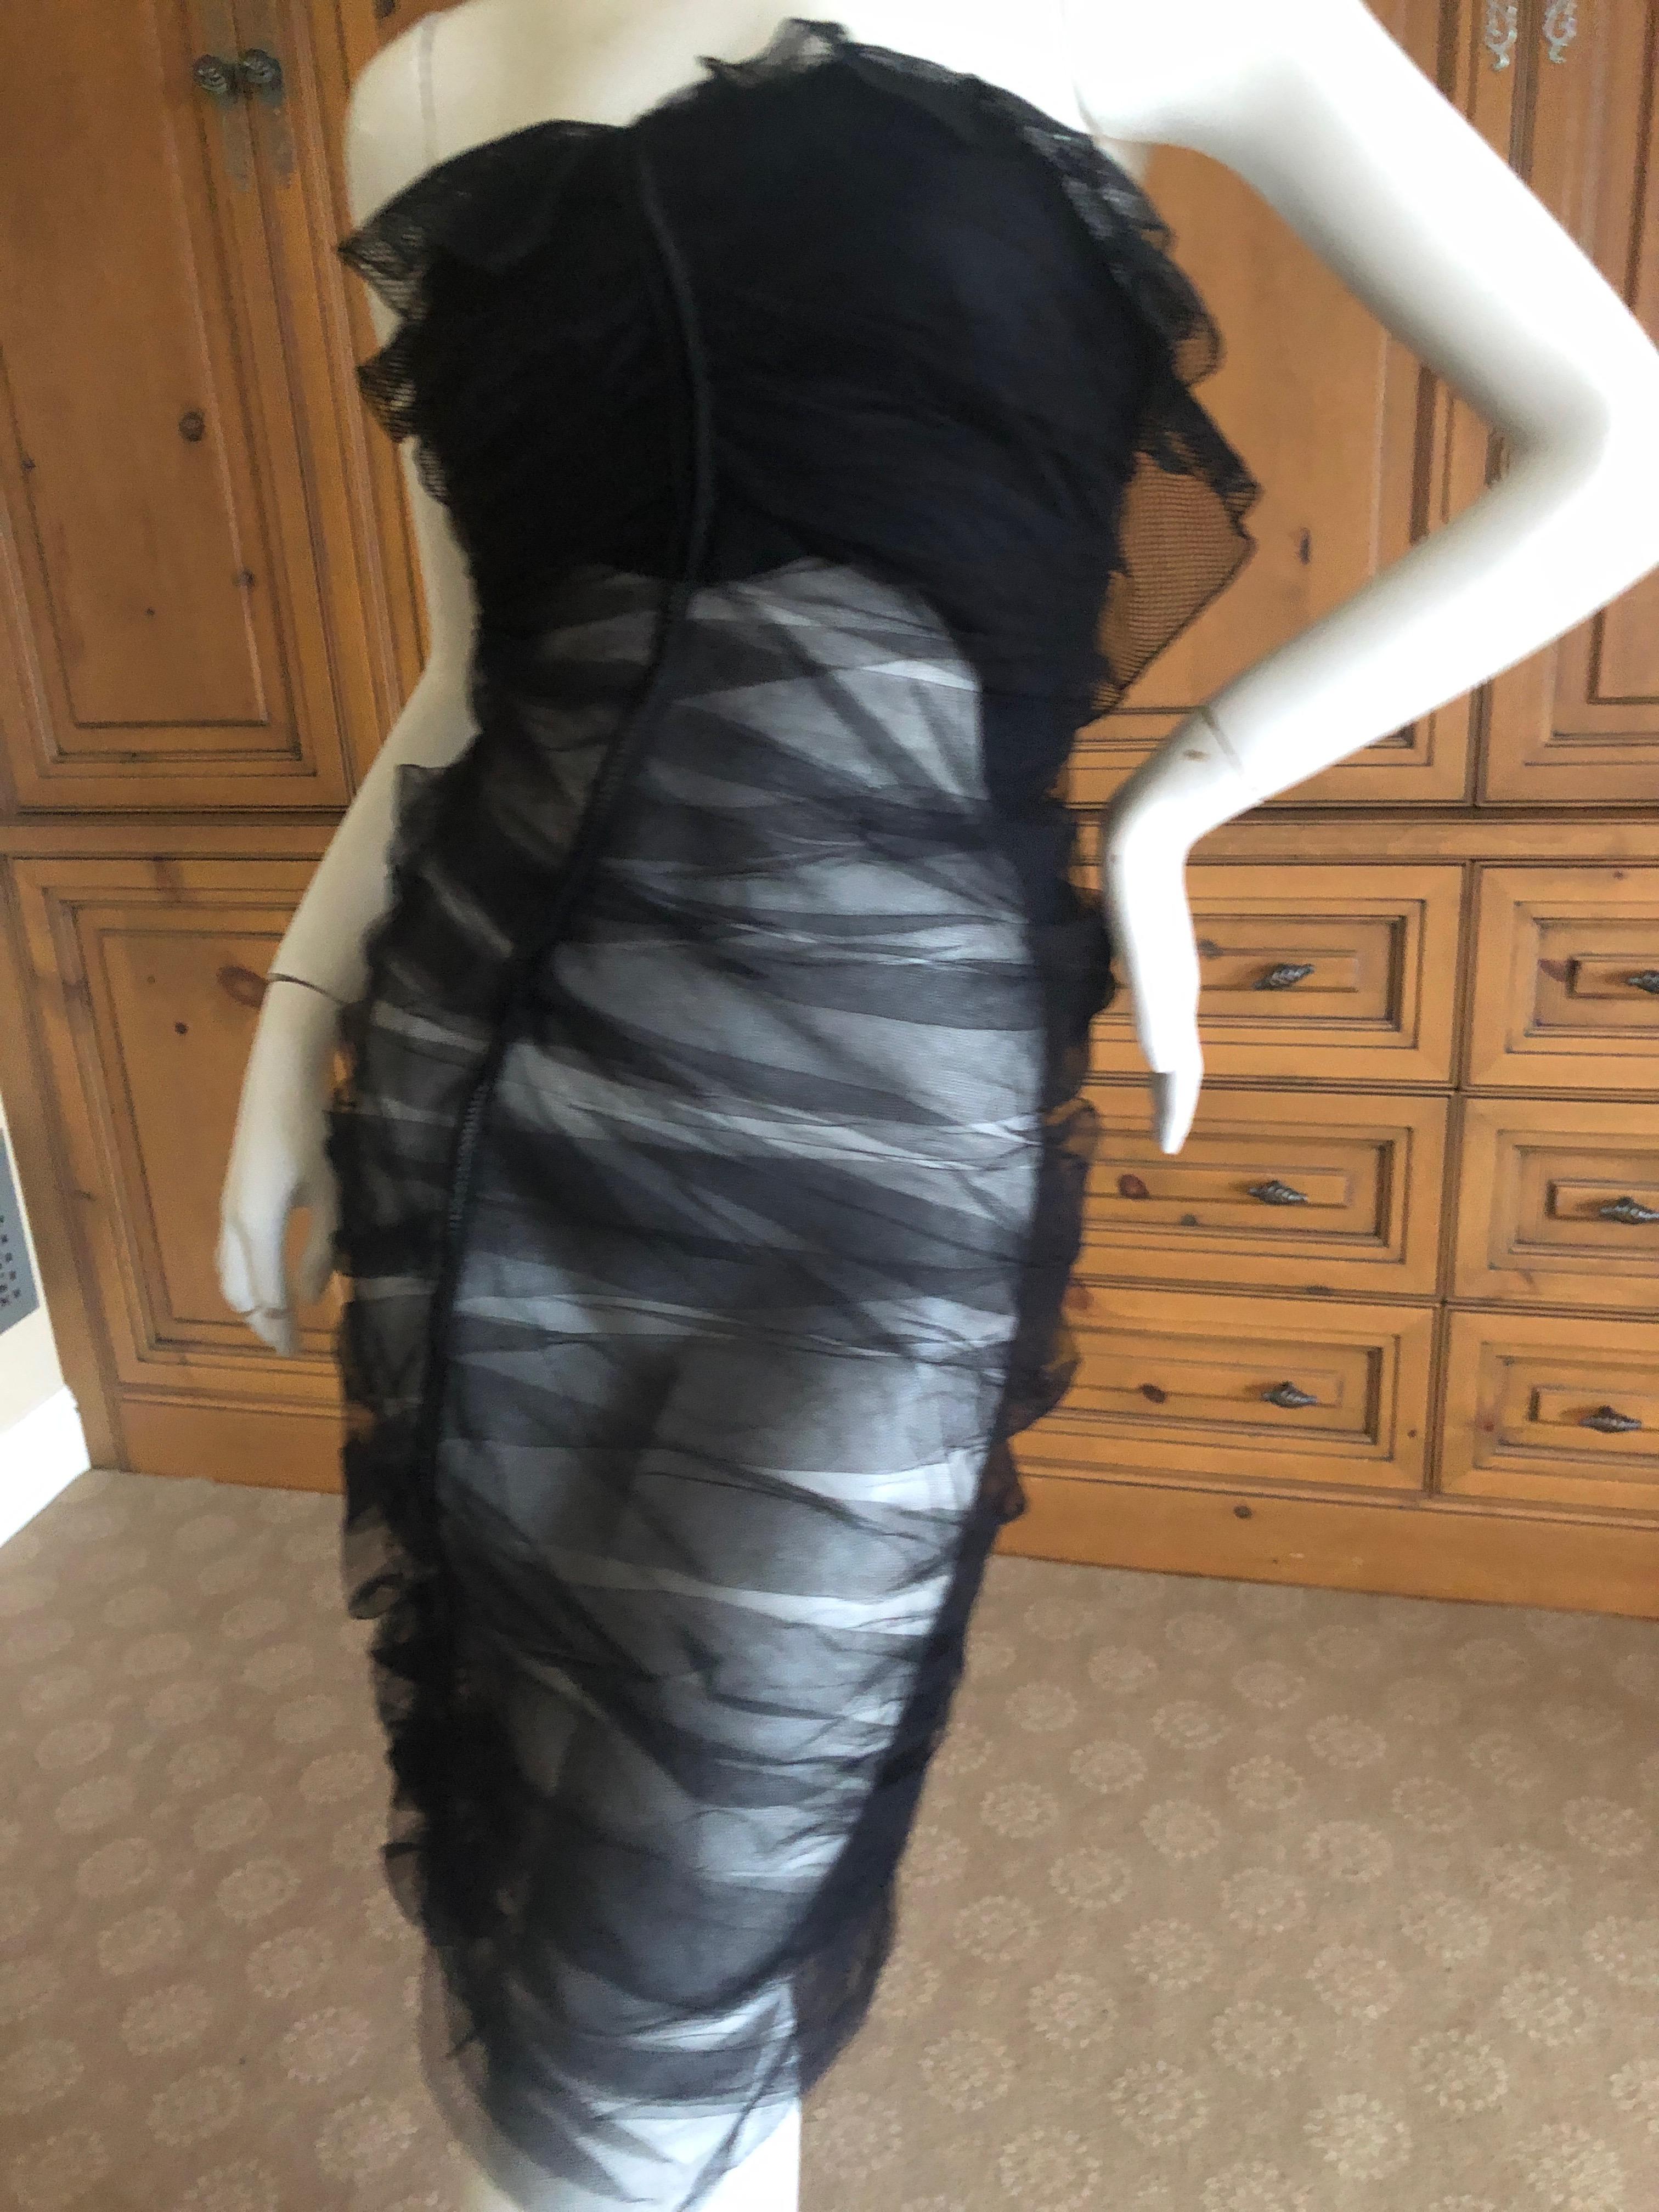 Yves Saint Laurent by Tom Ford  Ruched Black Tulle Cocktail Dress.
I show it with the lining raised to see details, and how it would look removed.
French Size 38
Bust 34